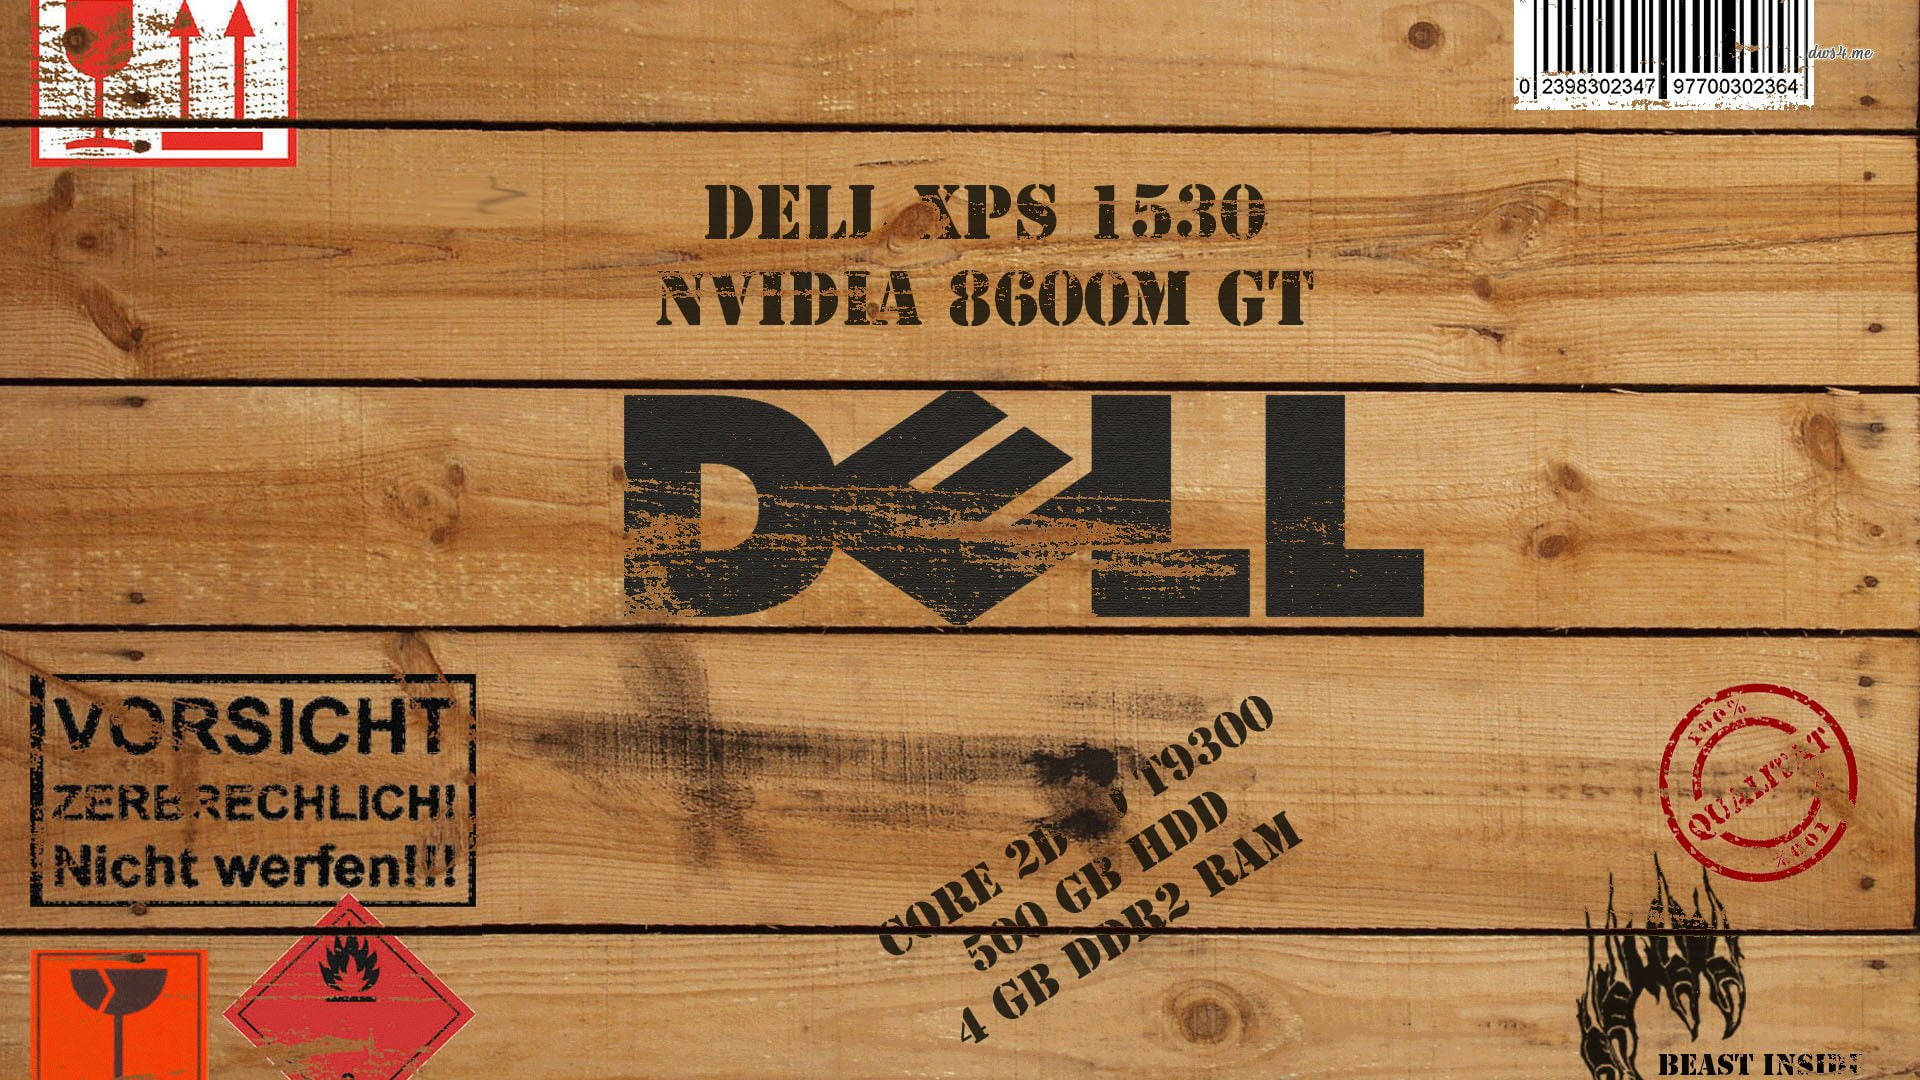 Dell Laptop Wooden Crate Background